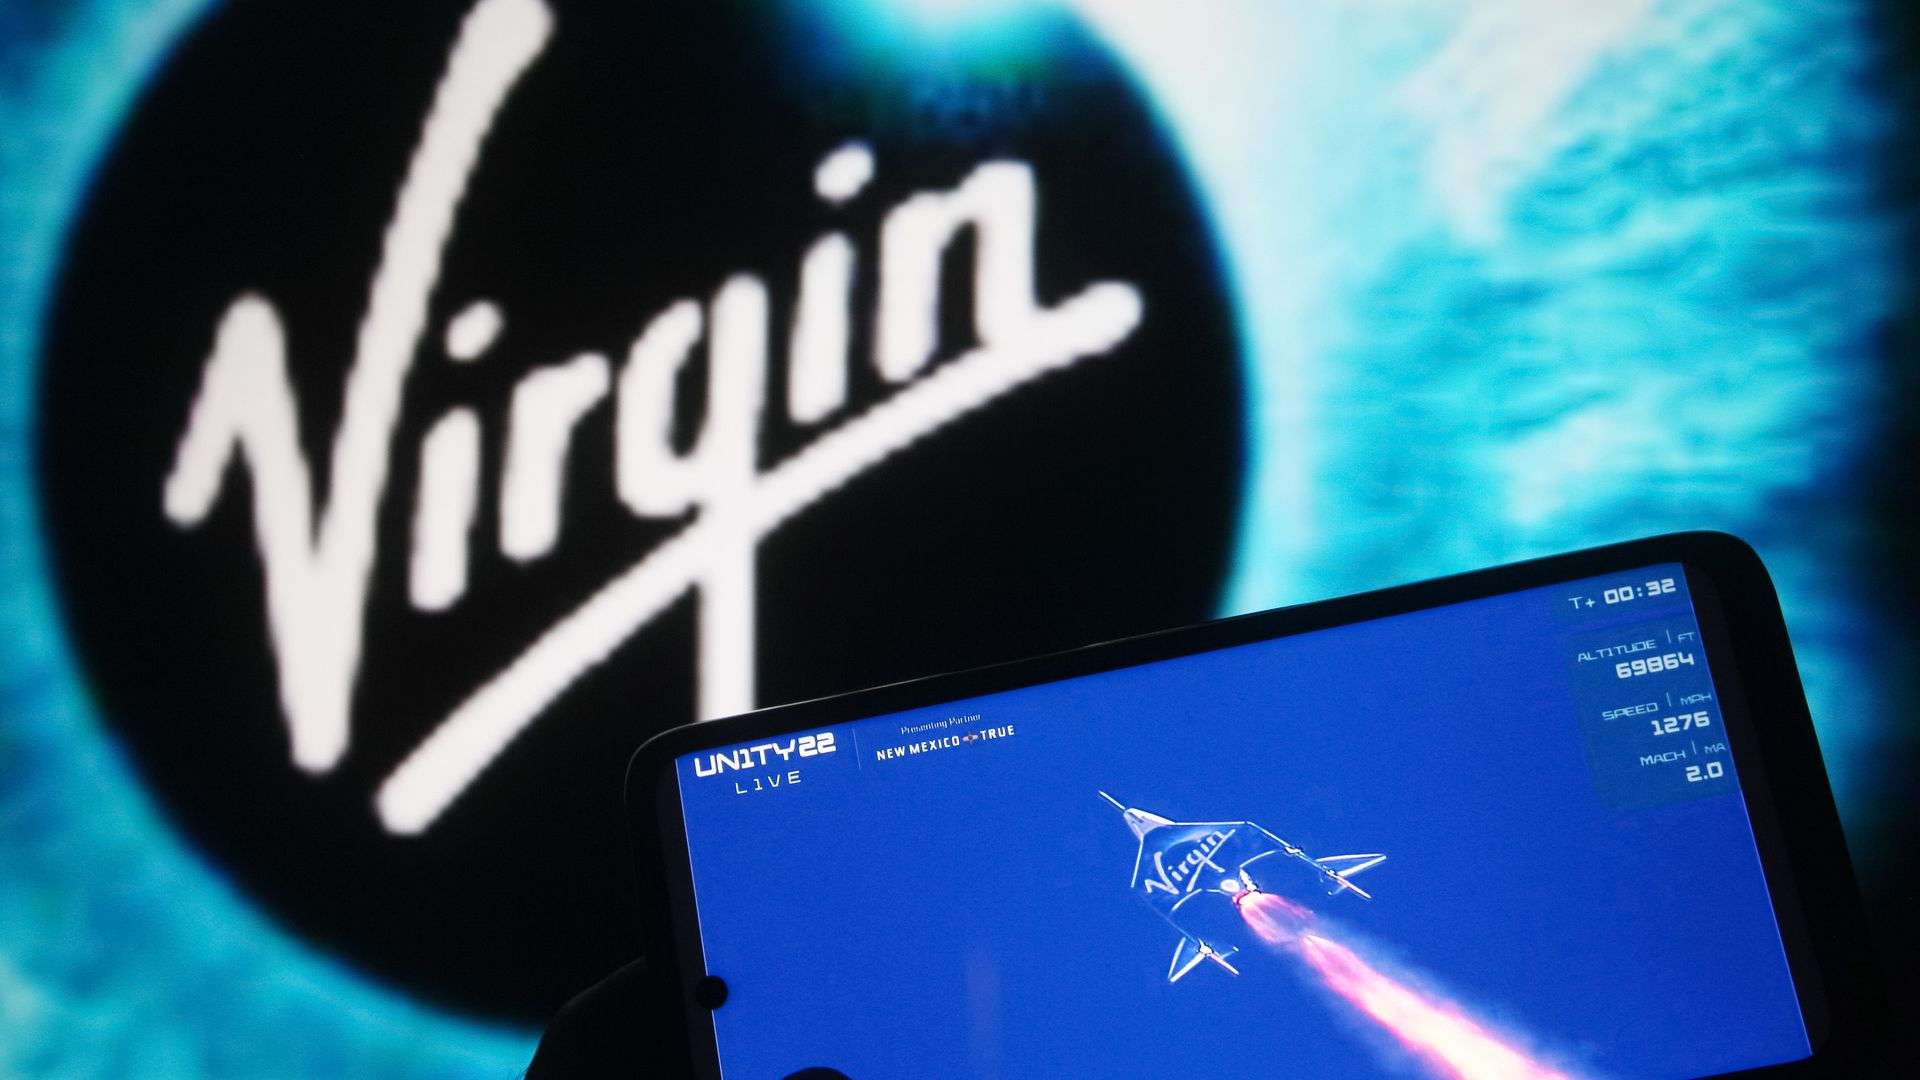 Mobile screen tracking a rocket launch, with a virgin logo in the background